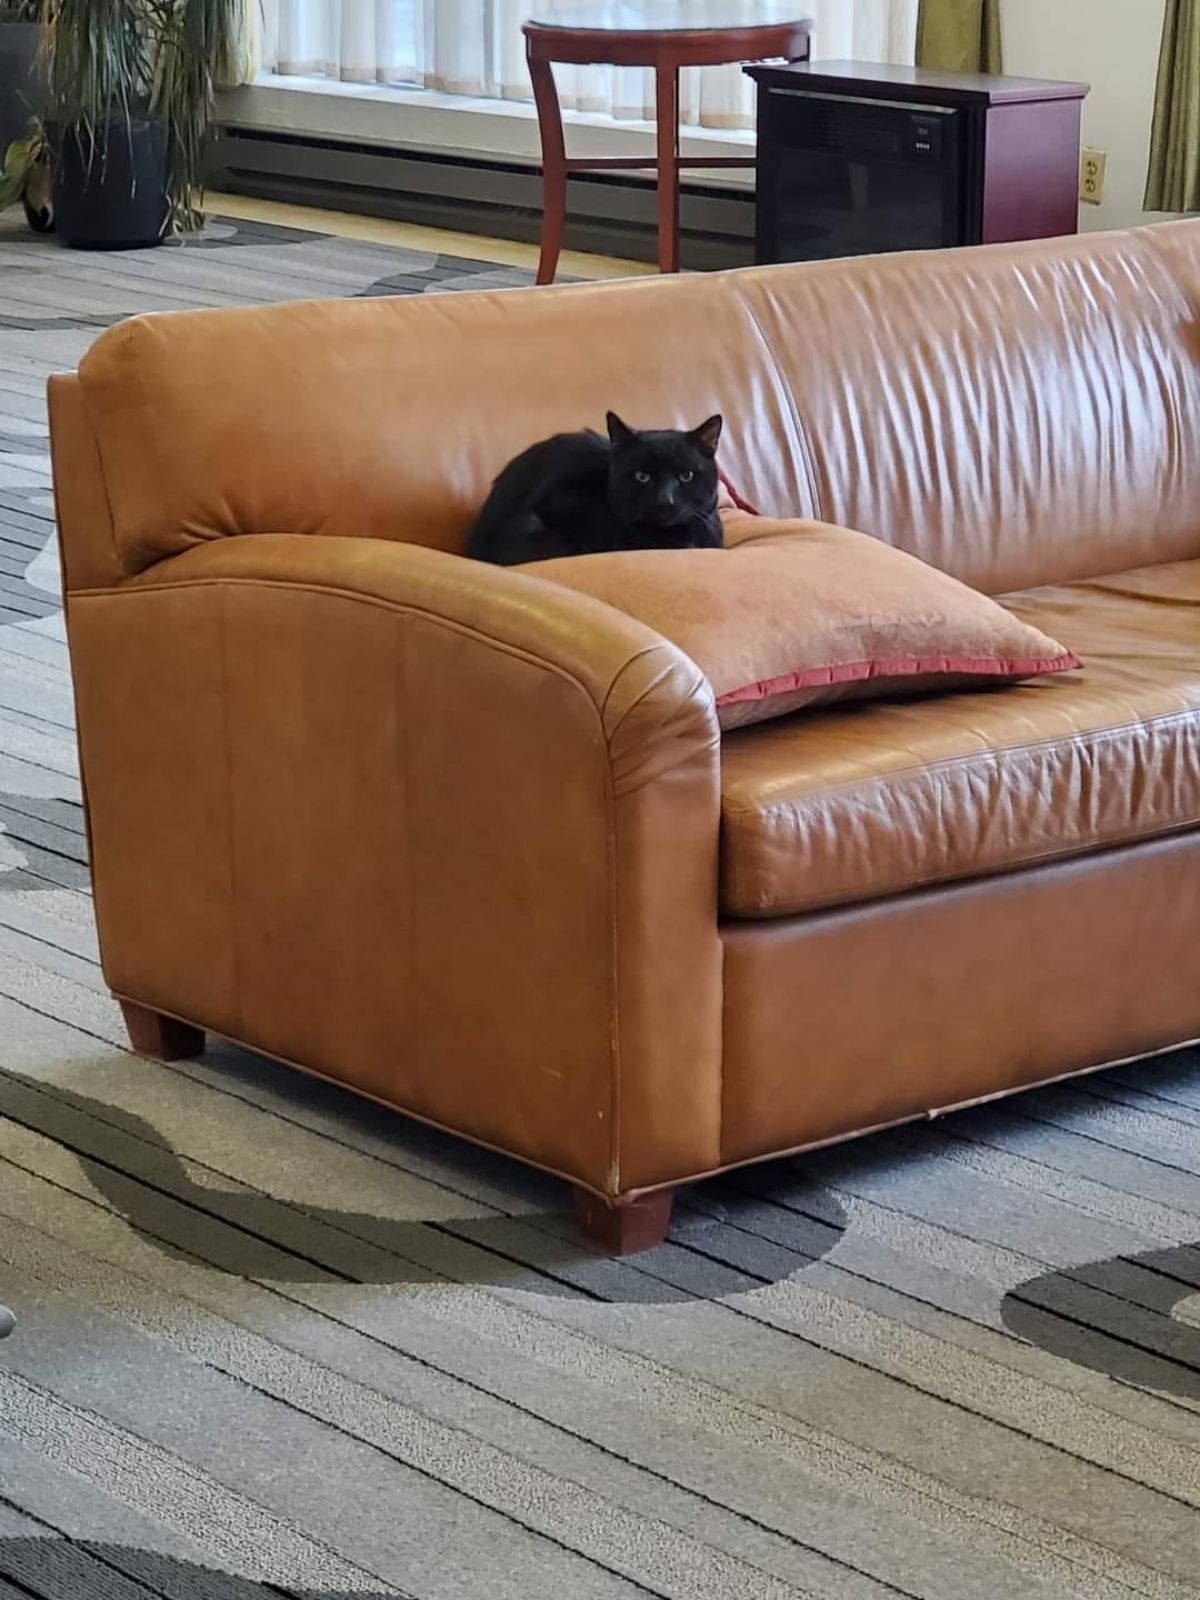 black cat sitting on a brown cushion on a brown sofa